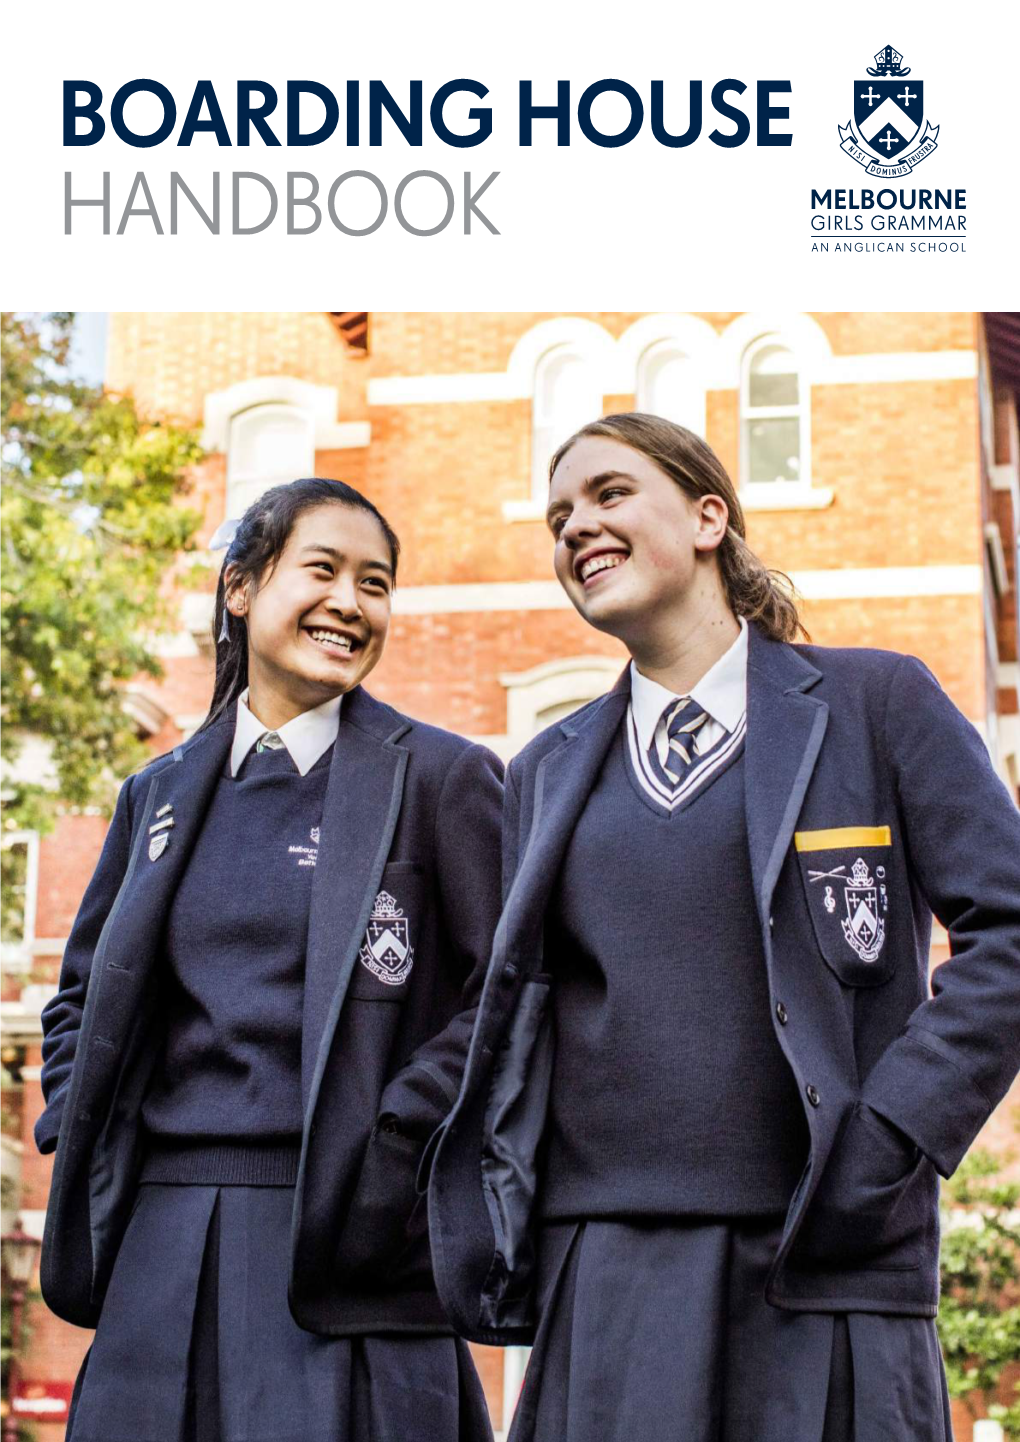 Boarding House Handbook Our Vision